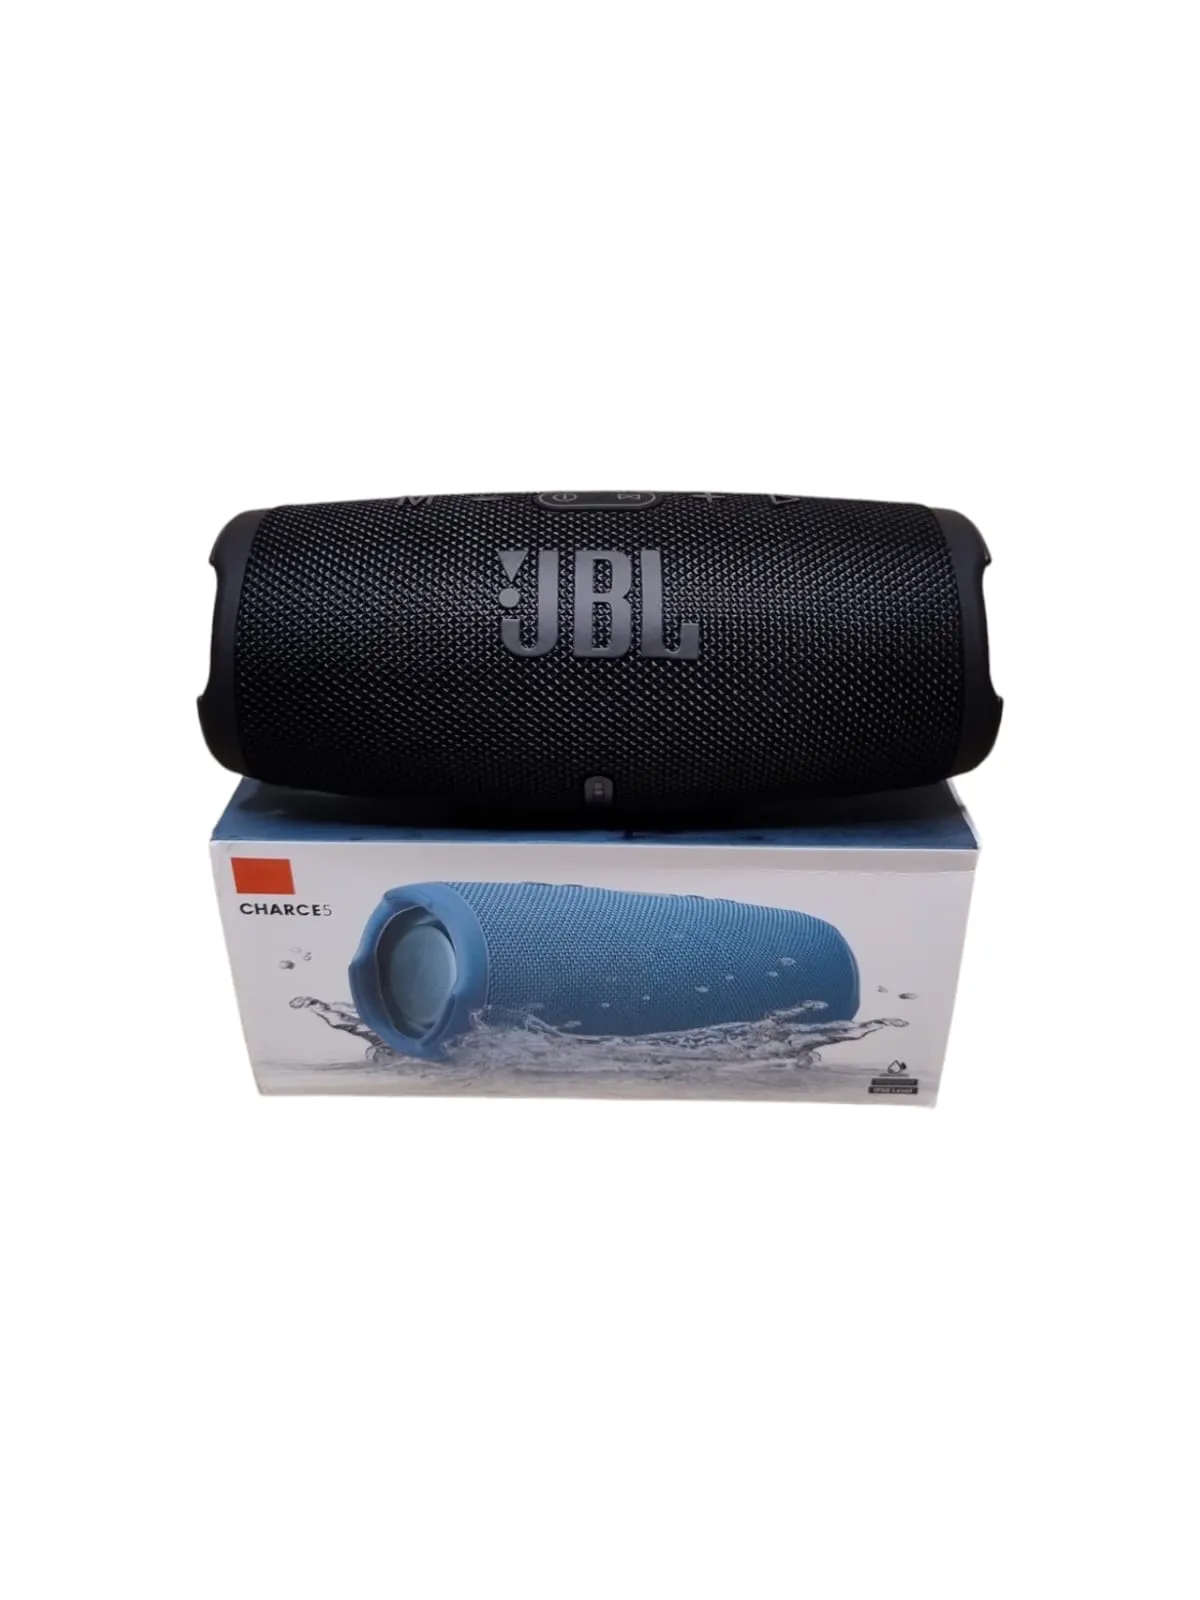 Parlante JBL CHARGE 5  1:1 Negro